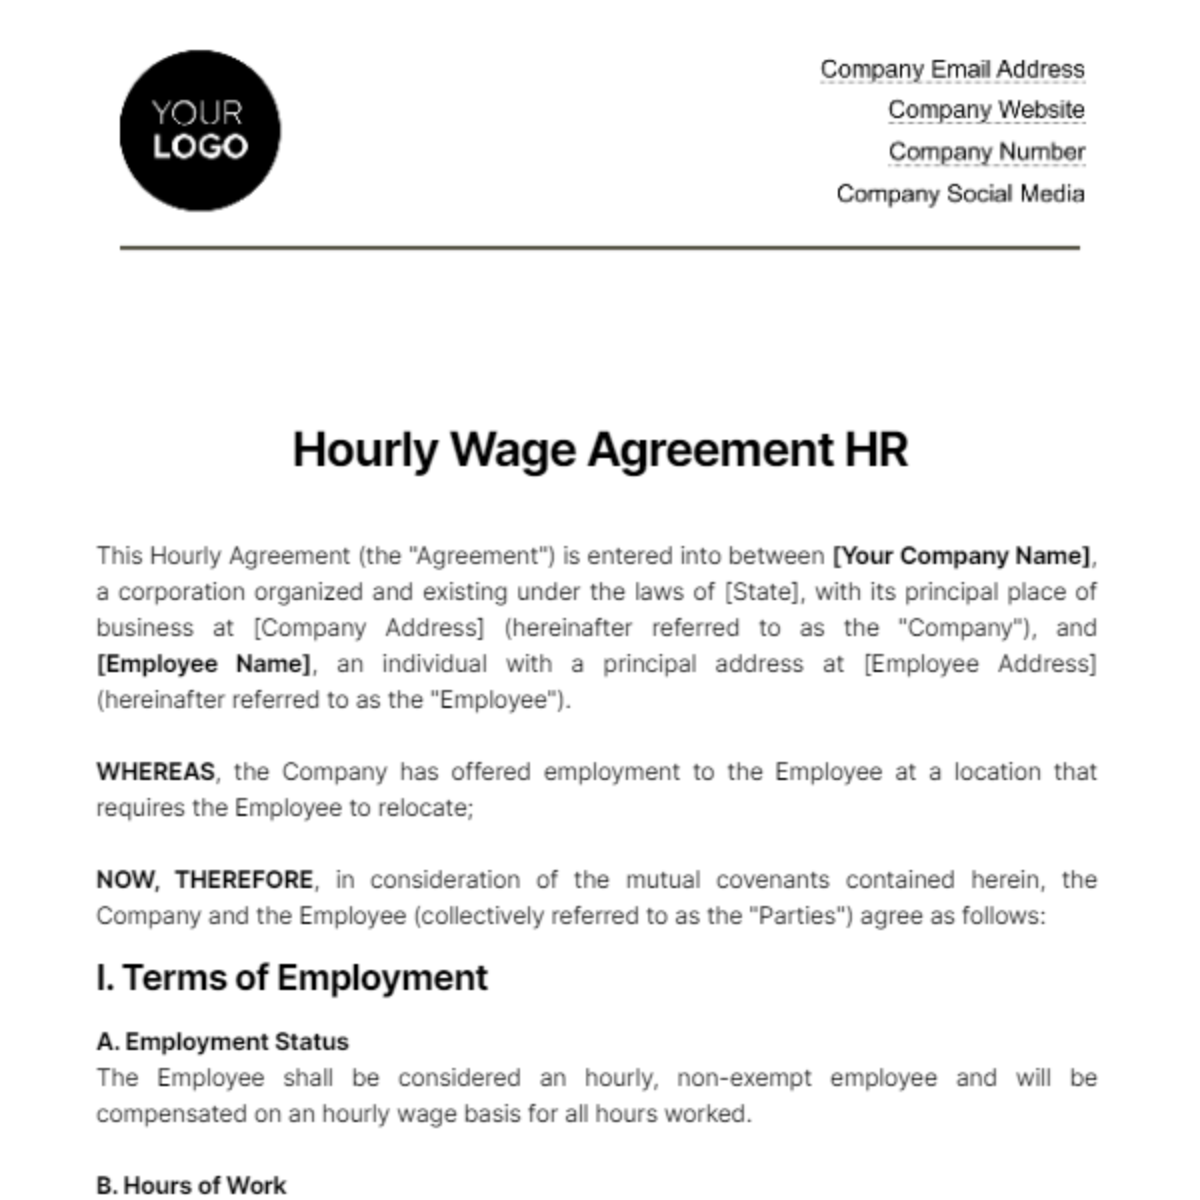 Hourly Wage Agreement HR Template